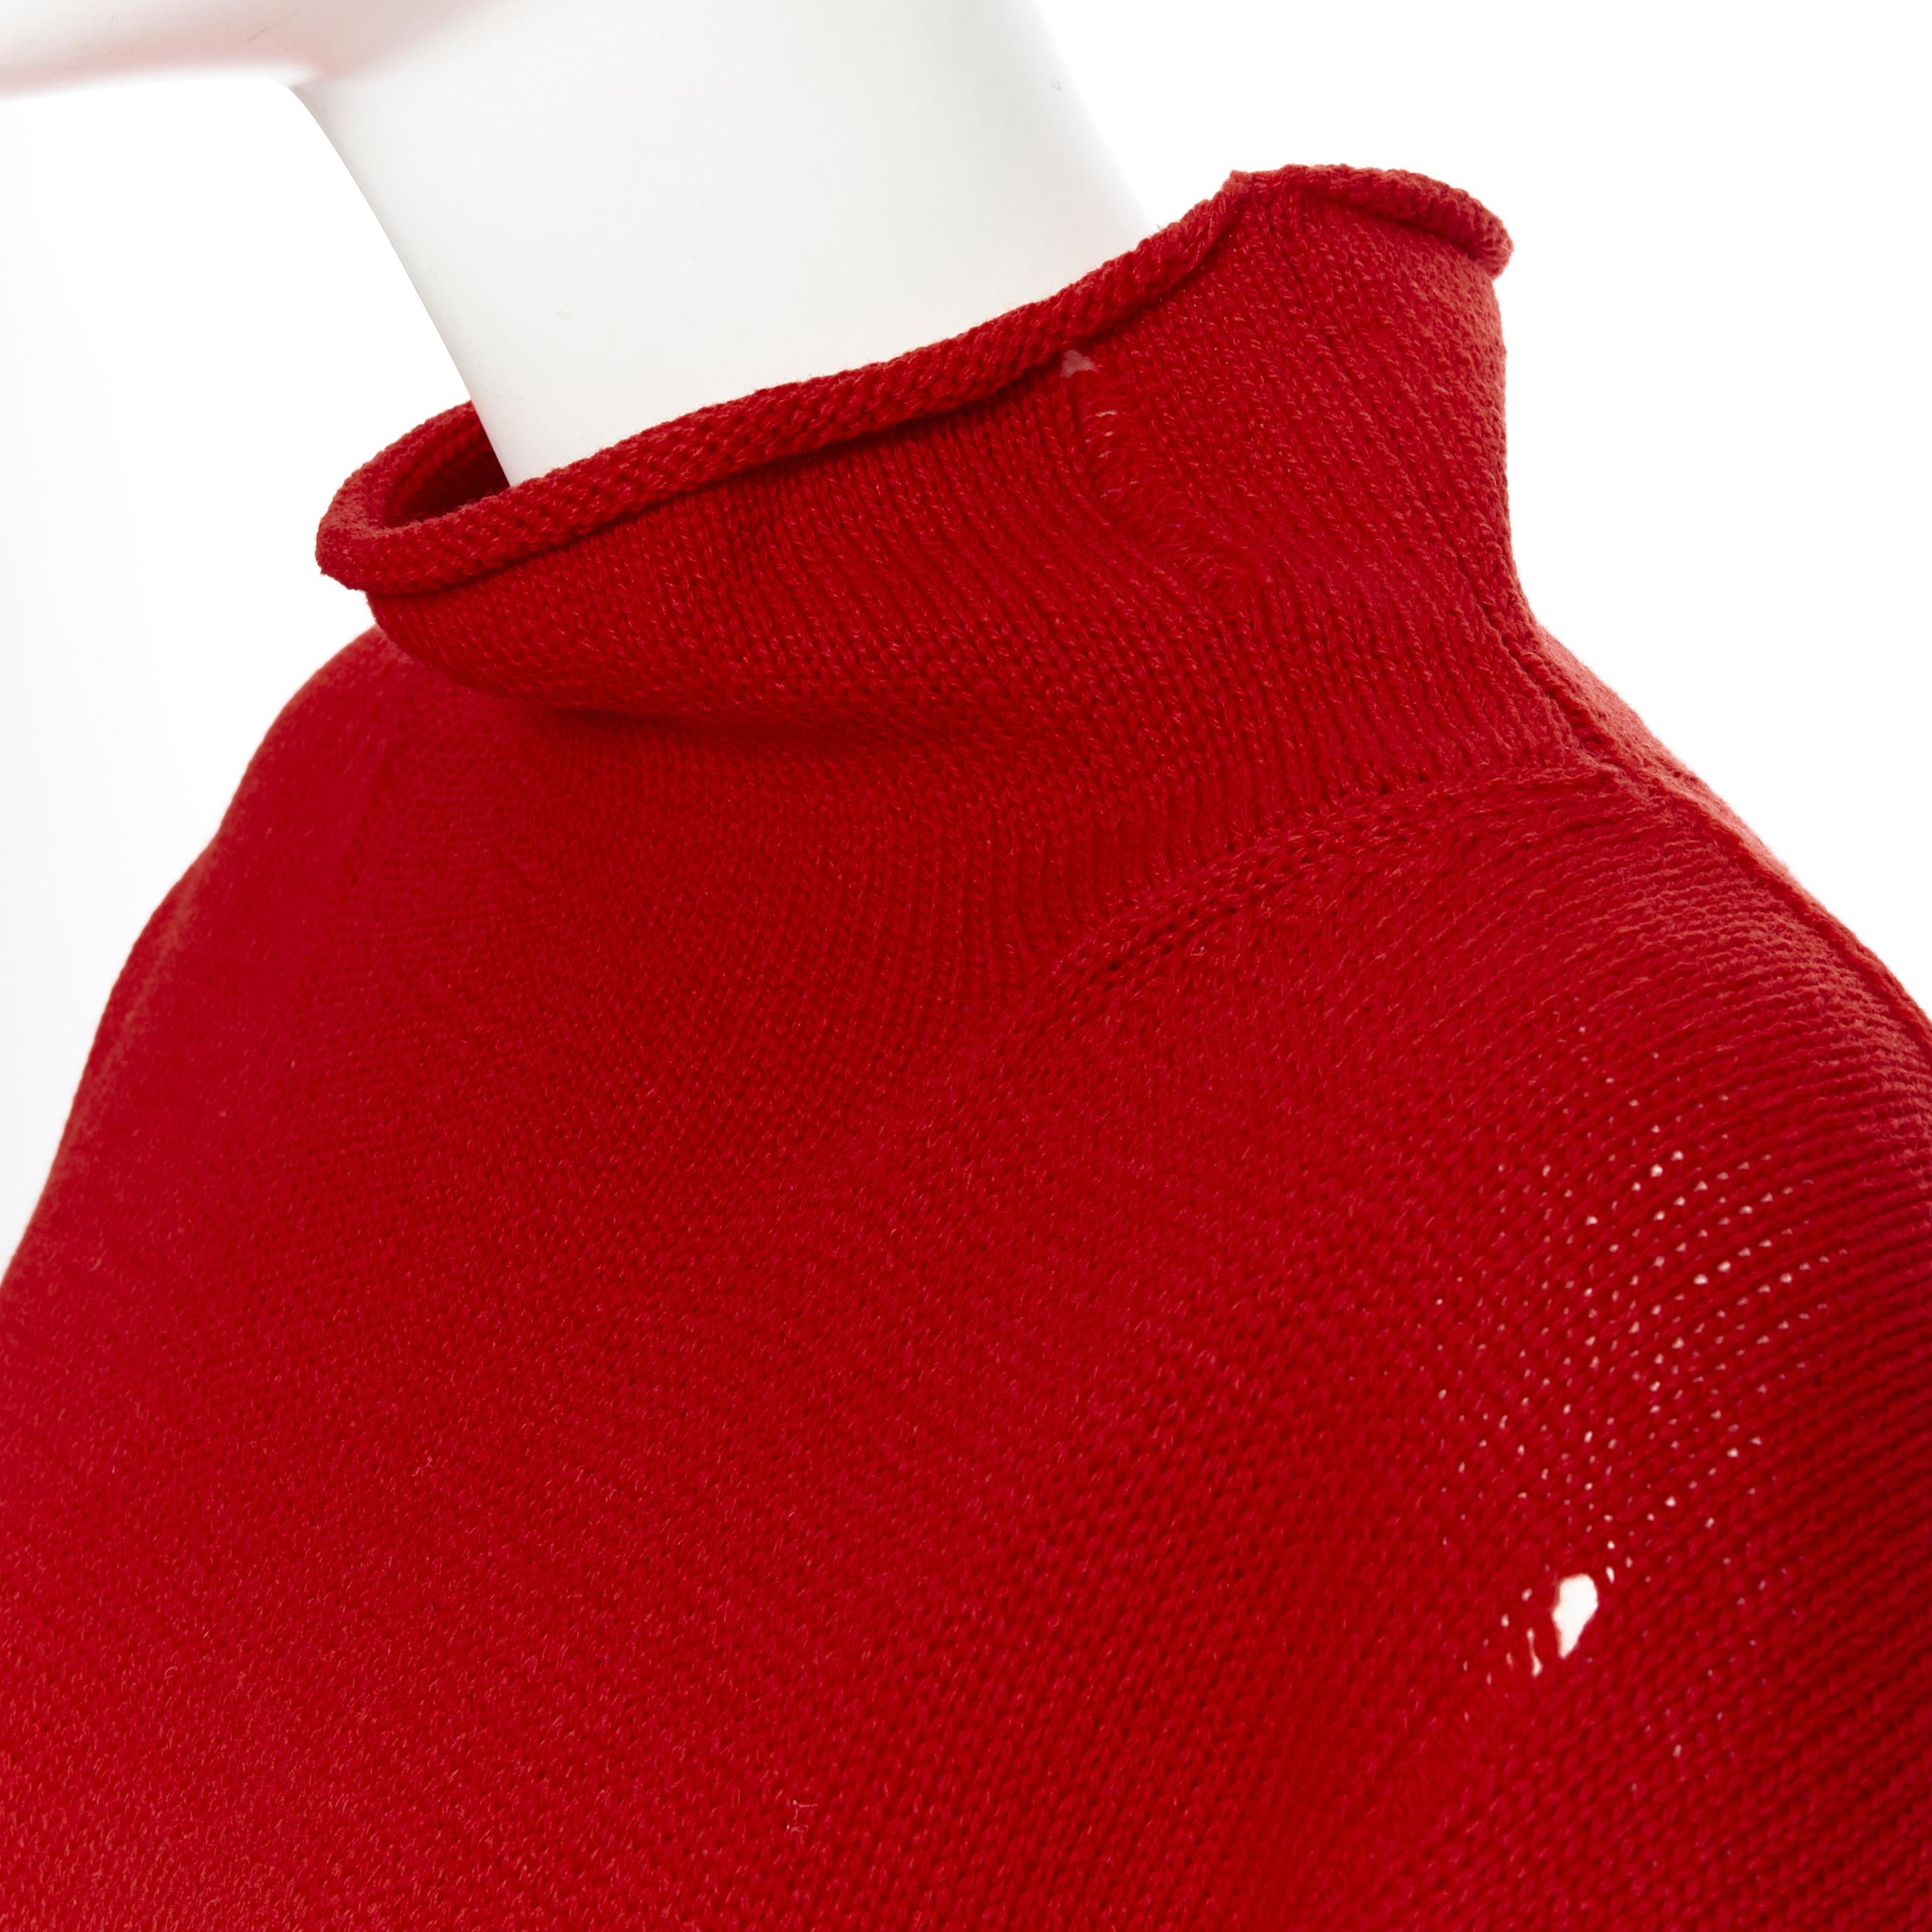 new B YOHJI YAMAMOTO Unisex 100% wool red distressed holey raw edge turtleneck M
Brand: B Yohji Yamamoto
Designer: Yohji Yamamoto
Model Name / Style: Wool sweater
Material: Wool
Color: Red
Pattern: Solid
Extra Detail: Dropped shoulder seam.